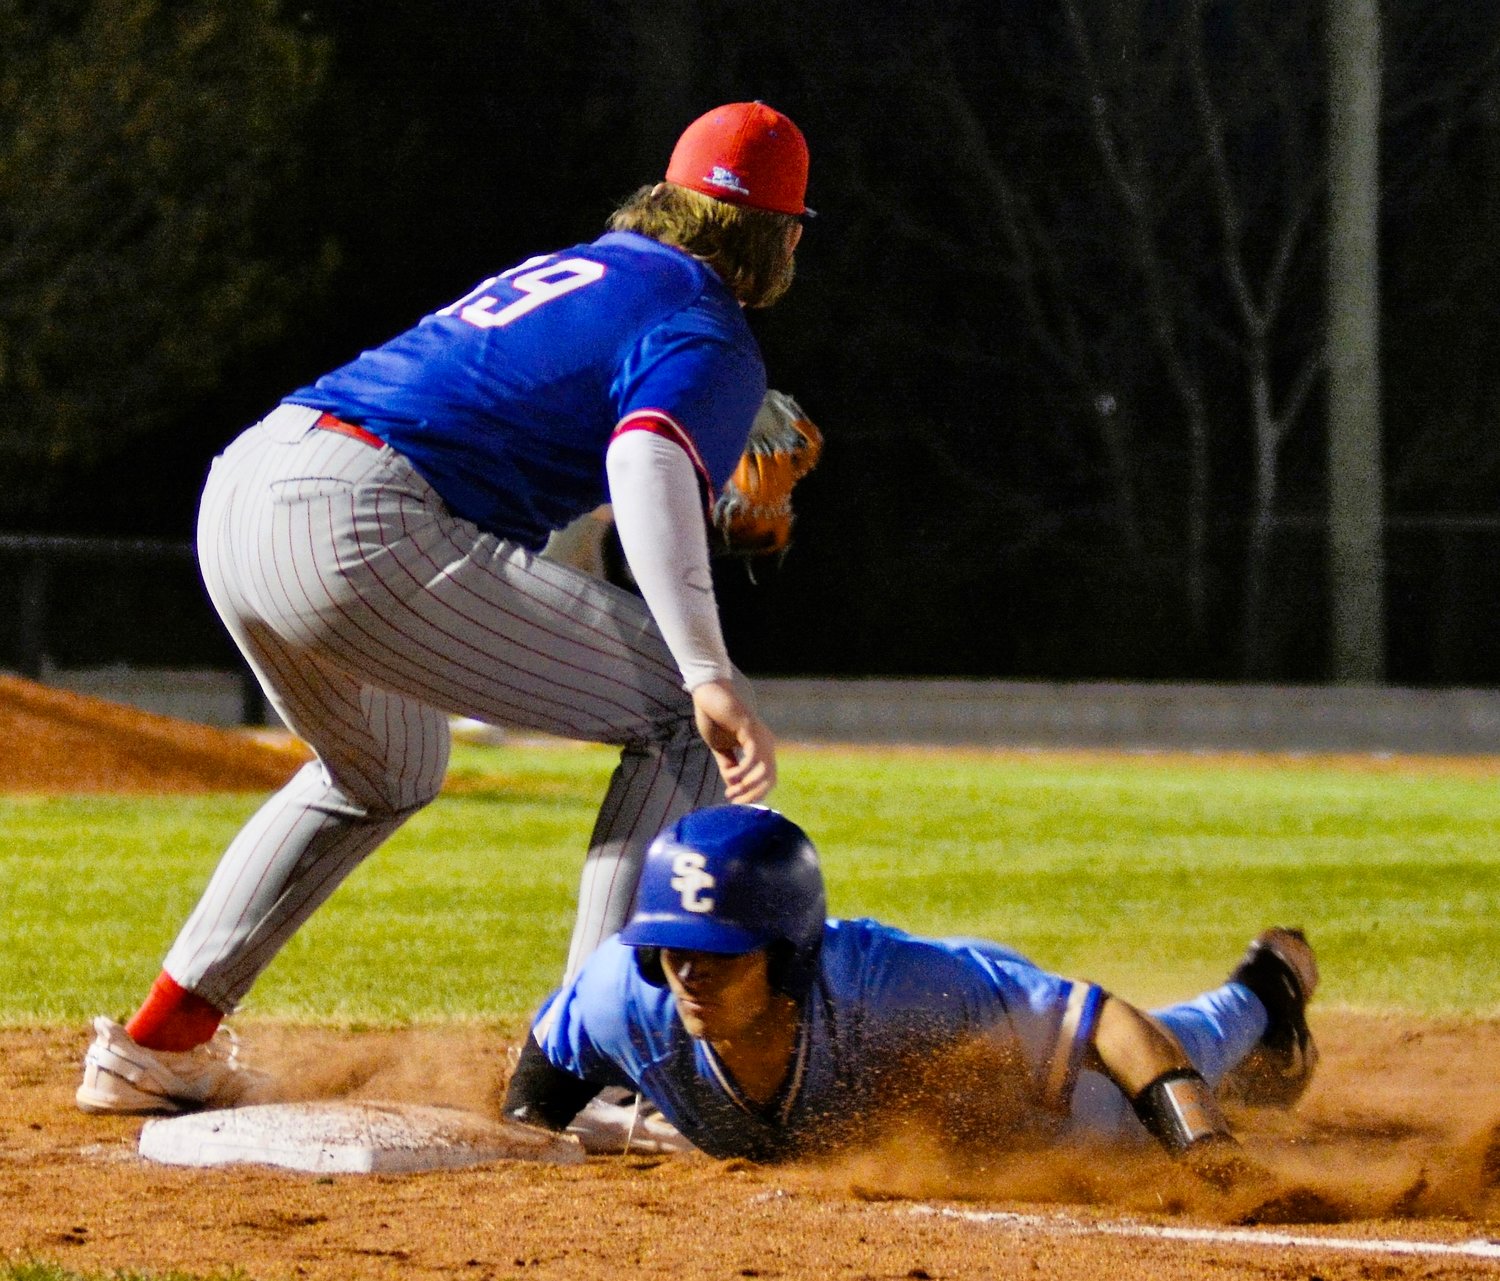 Shelbyville Central’s Nick Johnson safely dive back to first base after a pickoff attempt in the Eagles matchup against Warren County on Tuesday night.